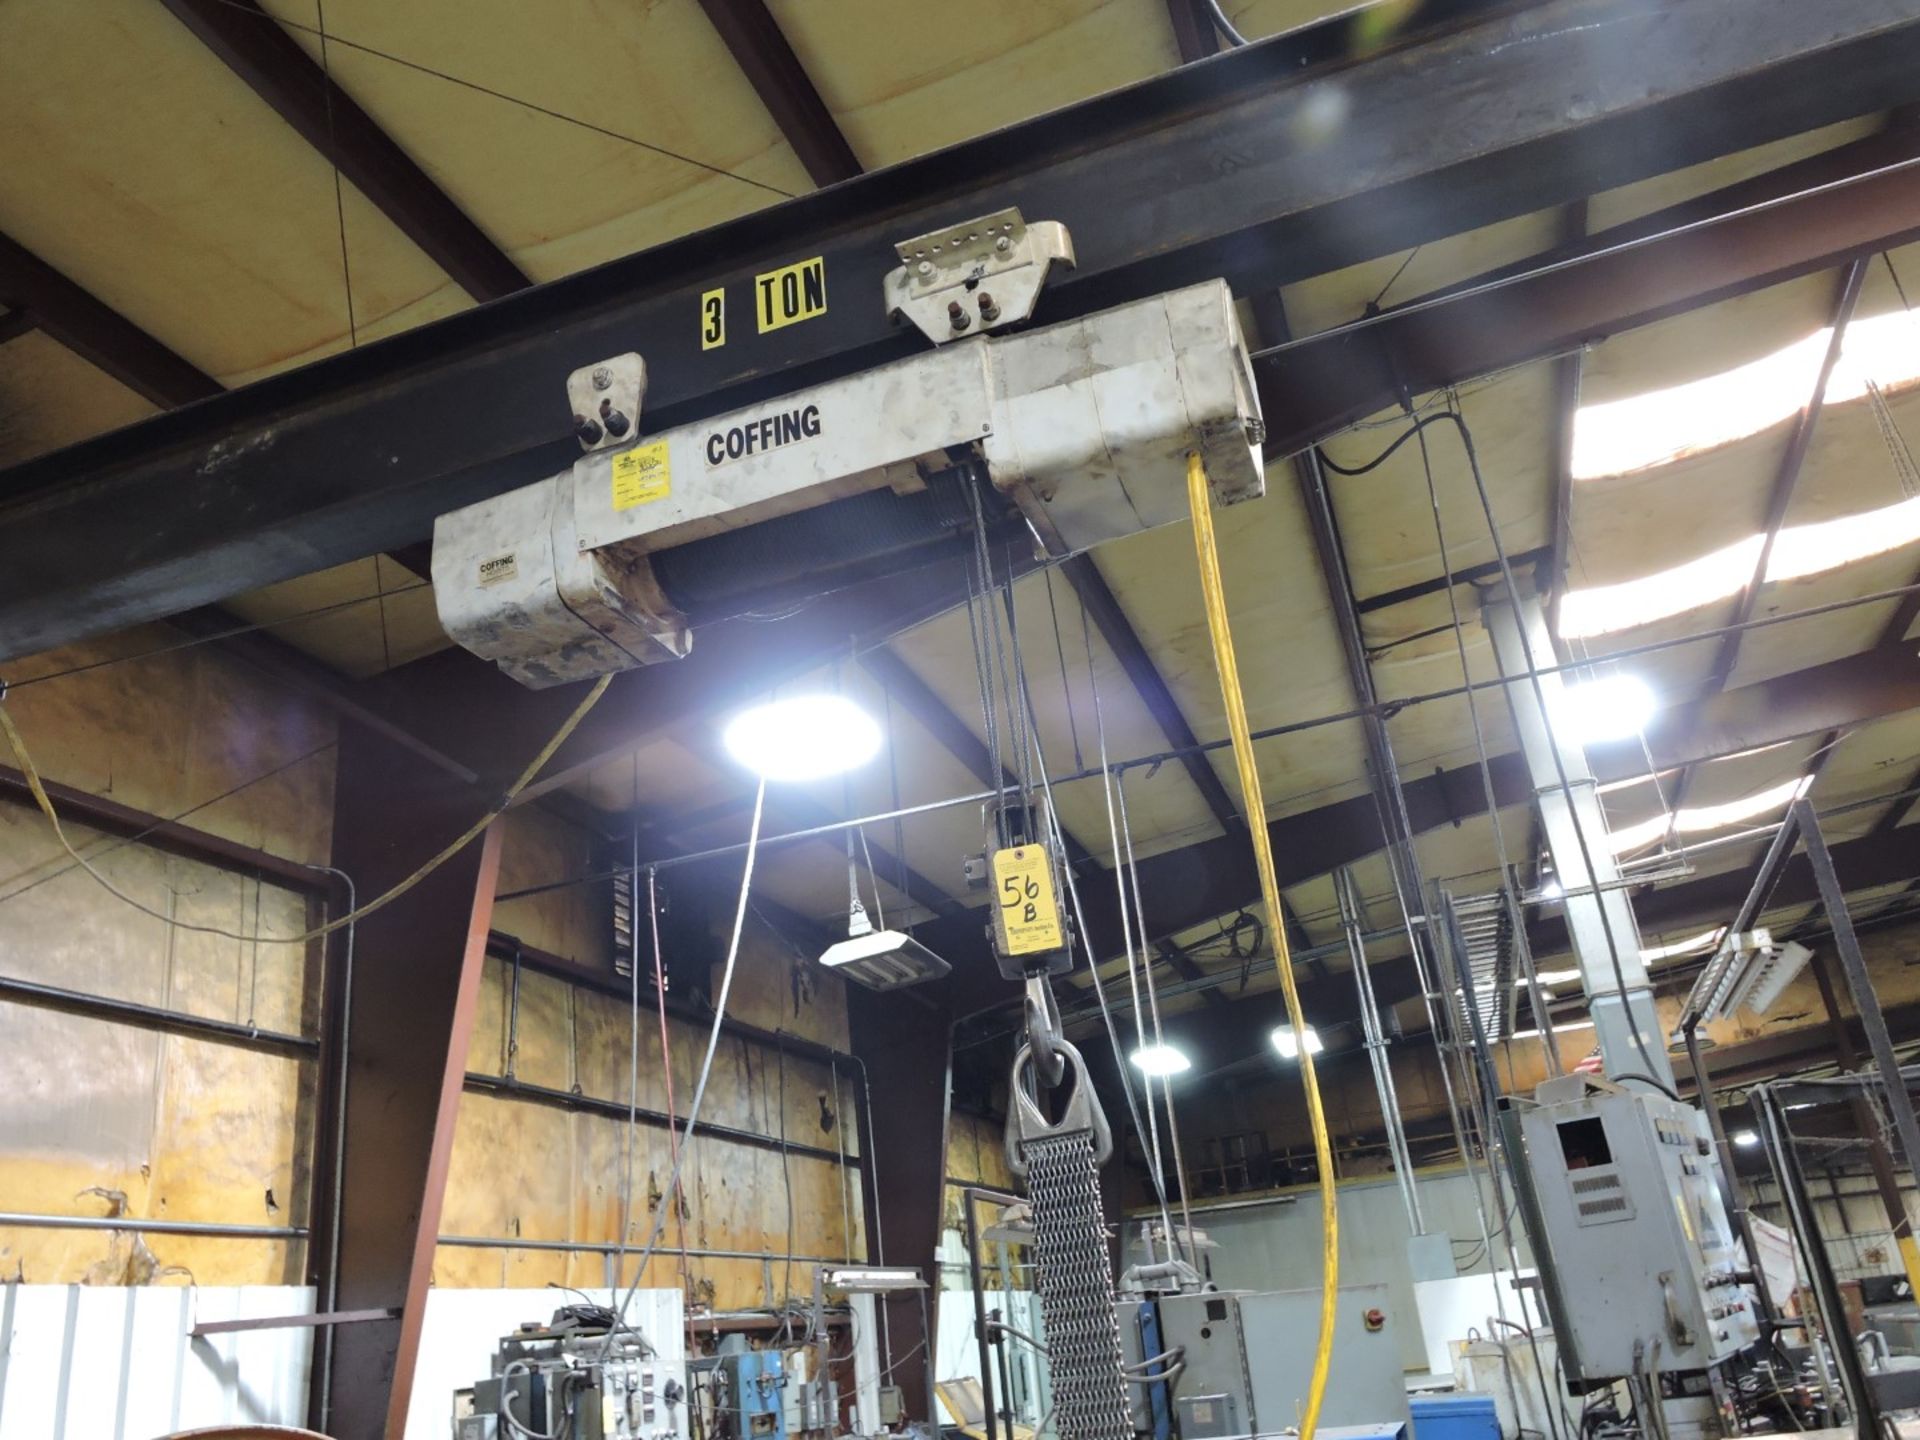 Free Standing Overhead Monorail Hoist, Overall Dimensions 10' Wide x 60' Long and 8' Under the - Image 2 of 4